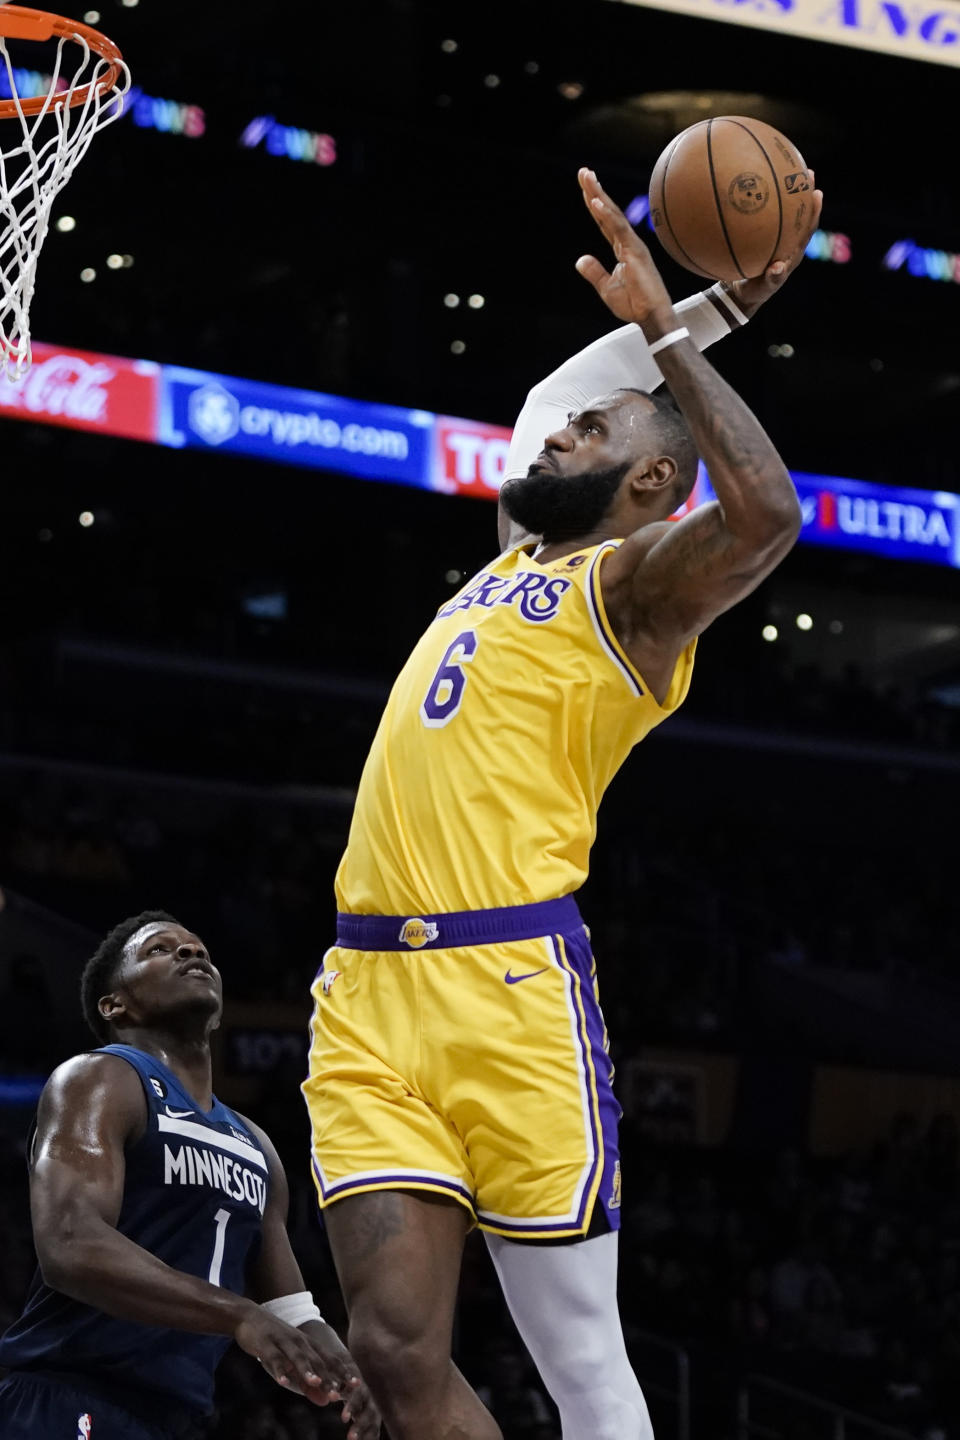 Los Angeles Lakers' LeBron James goes up for a dunk as Minnesota Timberwolves' Anthony Edwards watches during first half of an NBA preseason basketball game Wednesday, Oct. 12, 2022, in Los Angeles. (AP Photo/Jae C. Hong)